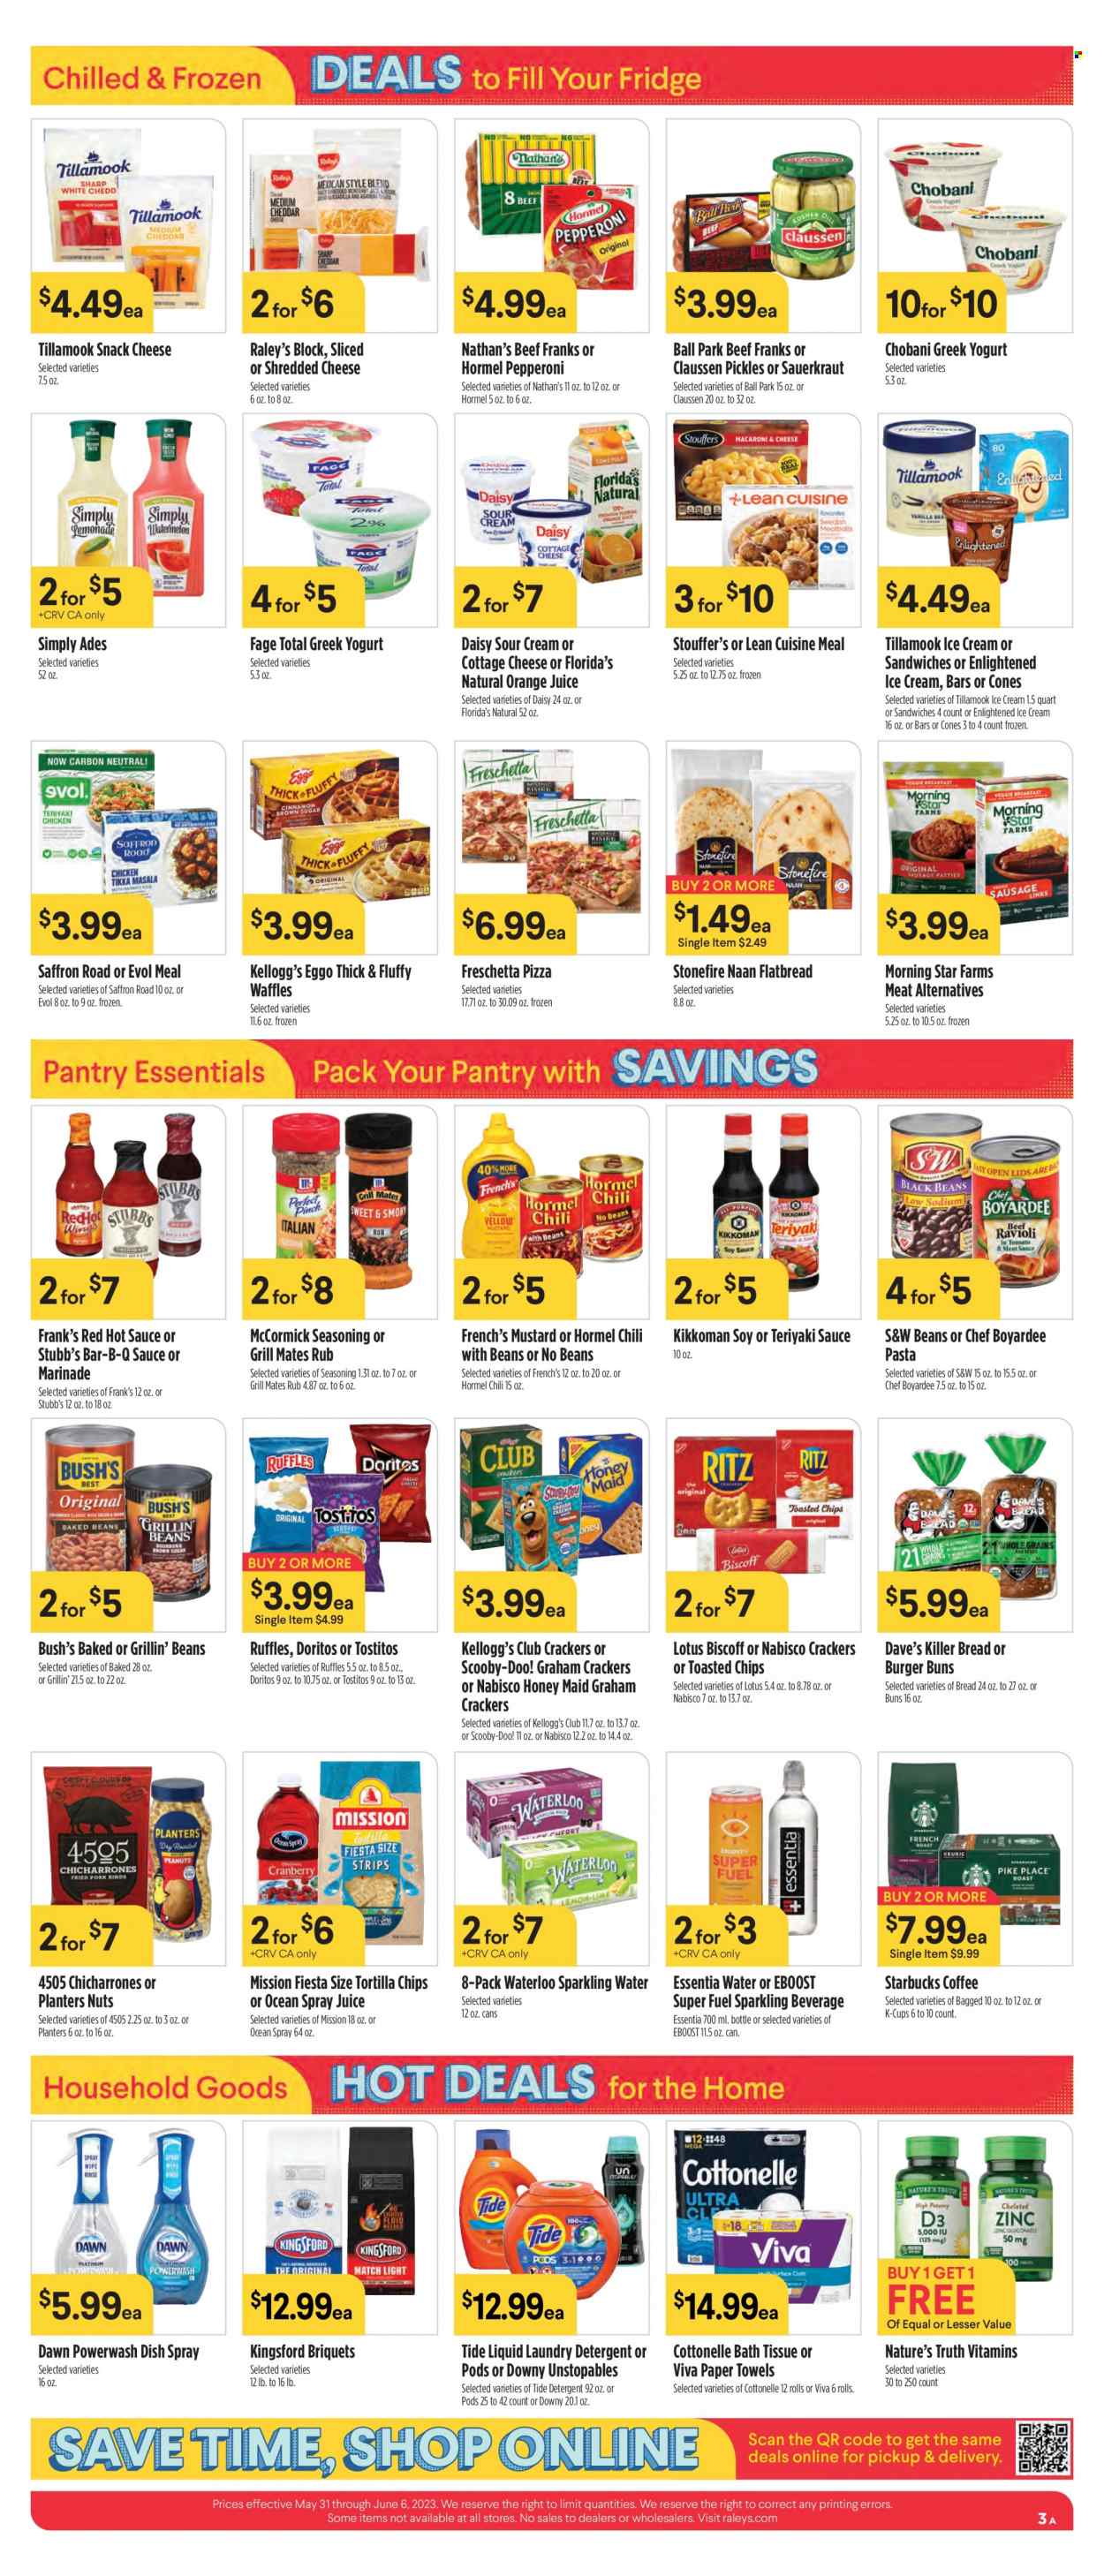 thumbnail - Raley's Flyer - 05/31/2023 - 06/06/2023 - Sales products - bread, buns, burger buns, waffles, pizza, pasta, Lean Cuisine, Hormel, Kingsford, ready meal, snack, frankfurters, cottage cheese, shredded cheese, greek yoghurt, Chobani, sour cream, ice cream, Enlightened lce Cream, Stouffer's, graham crackers, crackers, Kellogg's, Florida's Natural, Nabisco, Doritos, tortilla chips, Ruffles, Tostitos, salty snack, sauerkraut, pickles, baked beans, Chef Boyardee, pickled cabbage, Honey Maid, spice, mustard, hot sauce, Kikkoman, marinade, teriyaki sauce, Planters, orange juice, juice, sparkling water, water, Starbucks, coffee capsules, K-Cups, bath tissue, Cottonelle, kitchen towels, paper towels, detergent, Tide, Unstopables, laundry detergent, Lotus, Nature's Truth. Page 3.